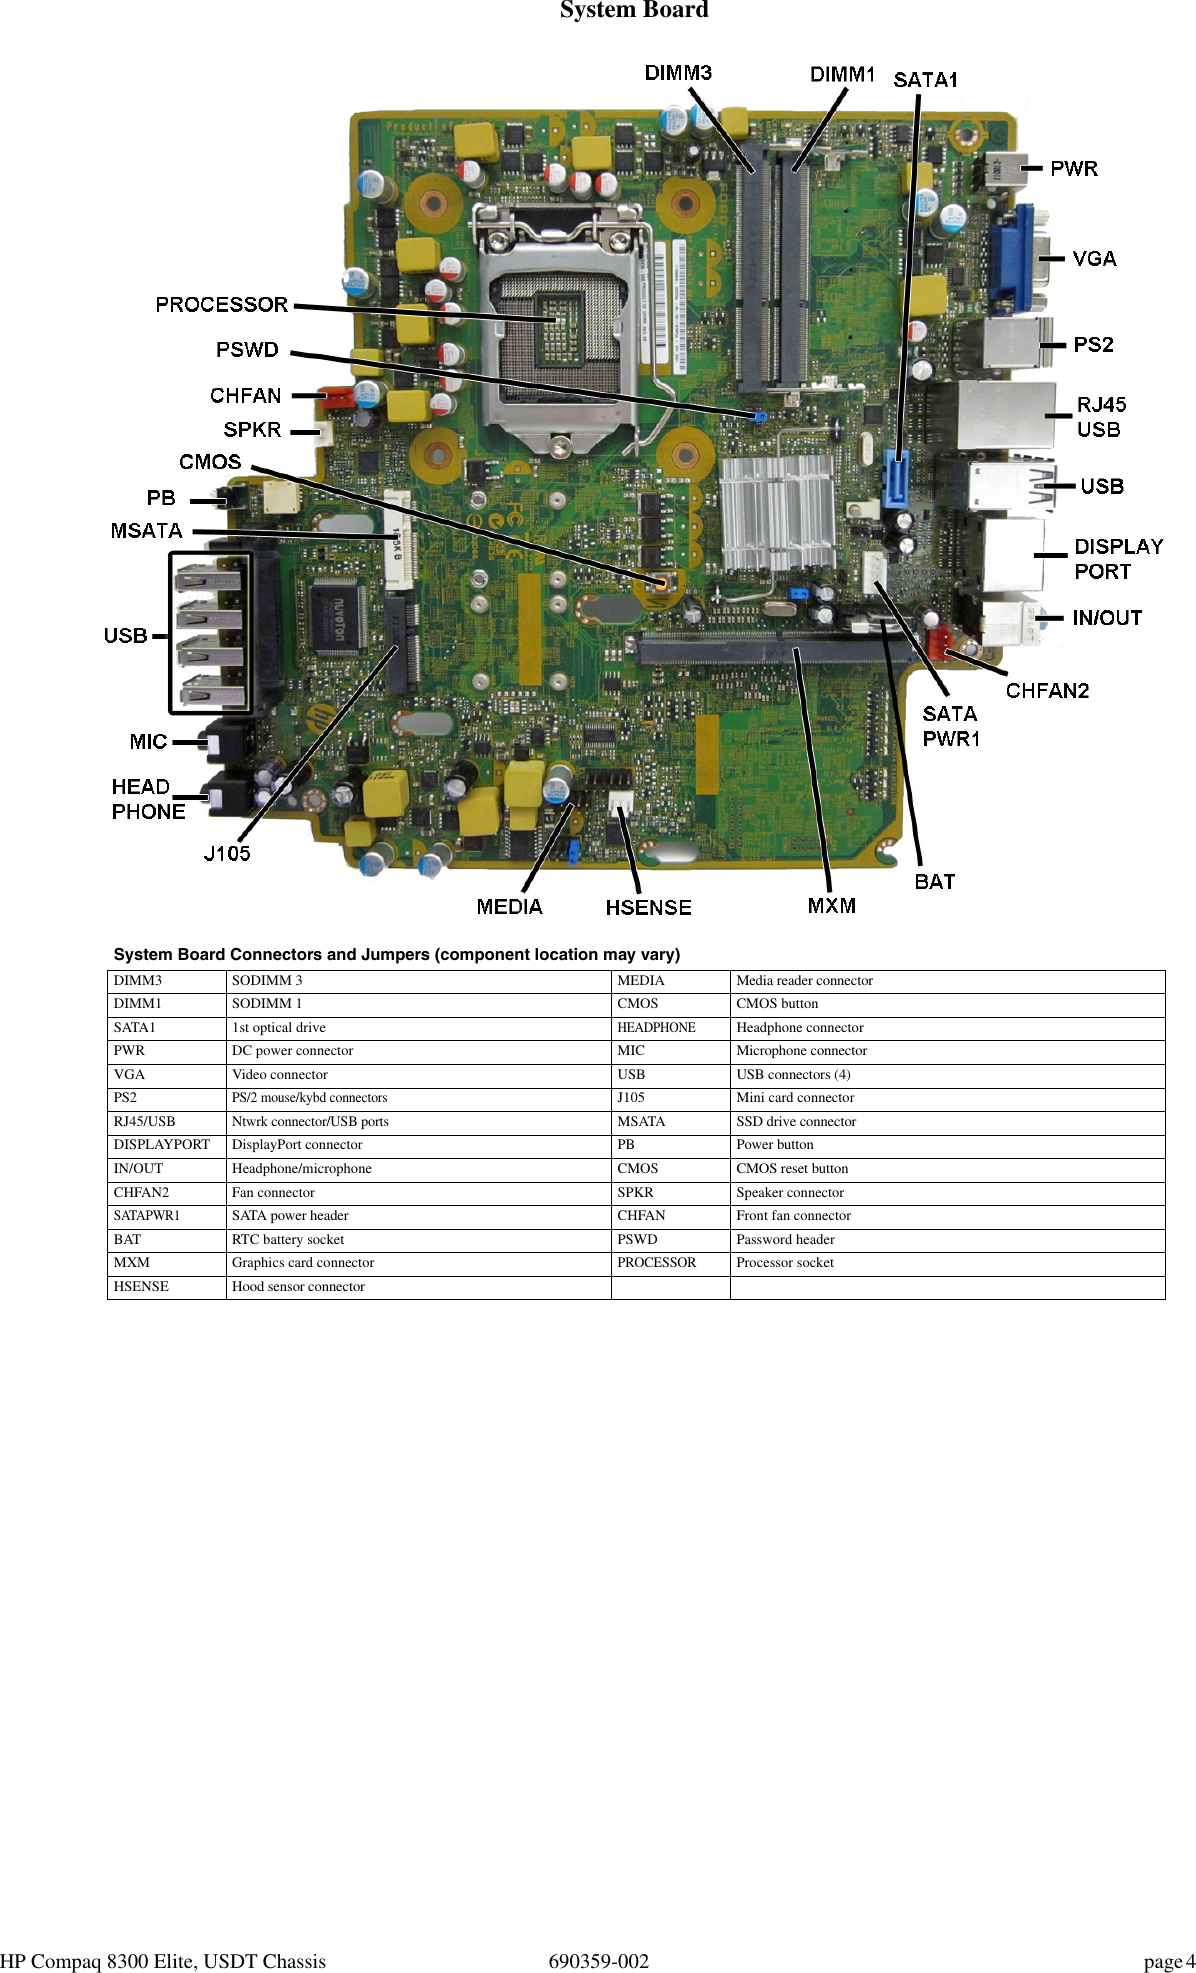 Page 4 of 4 - Hp Hp-Compaq-Elite-8300-Ultra-Slim-Pc-Reference-Guide- Inventors USDT IPSM - Win8  Hp-compaq-elite-8300-ultra-slim-pc-reference-guide